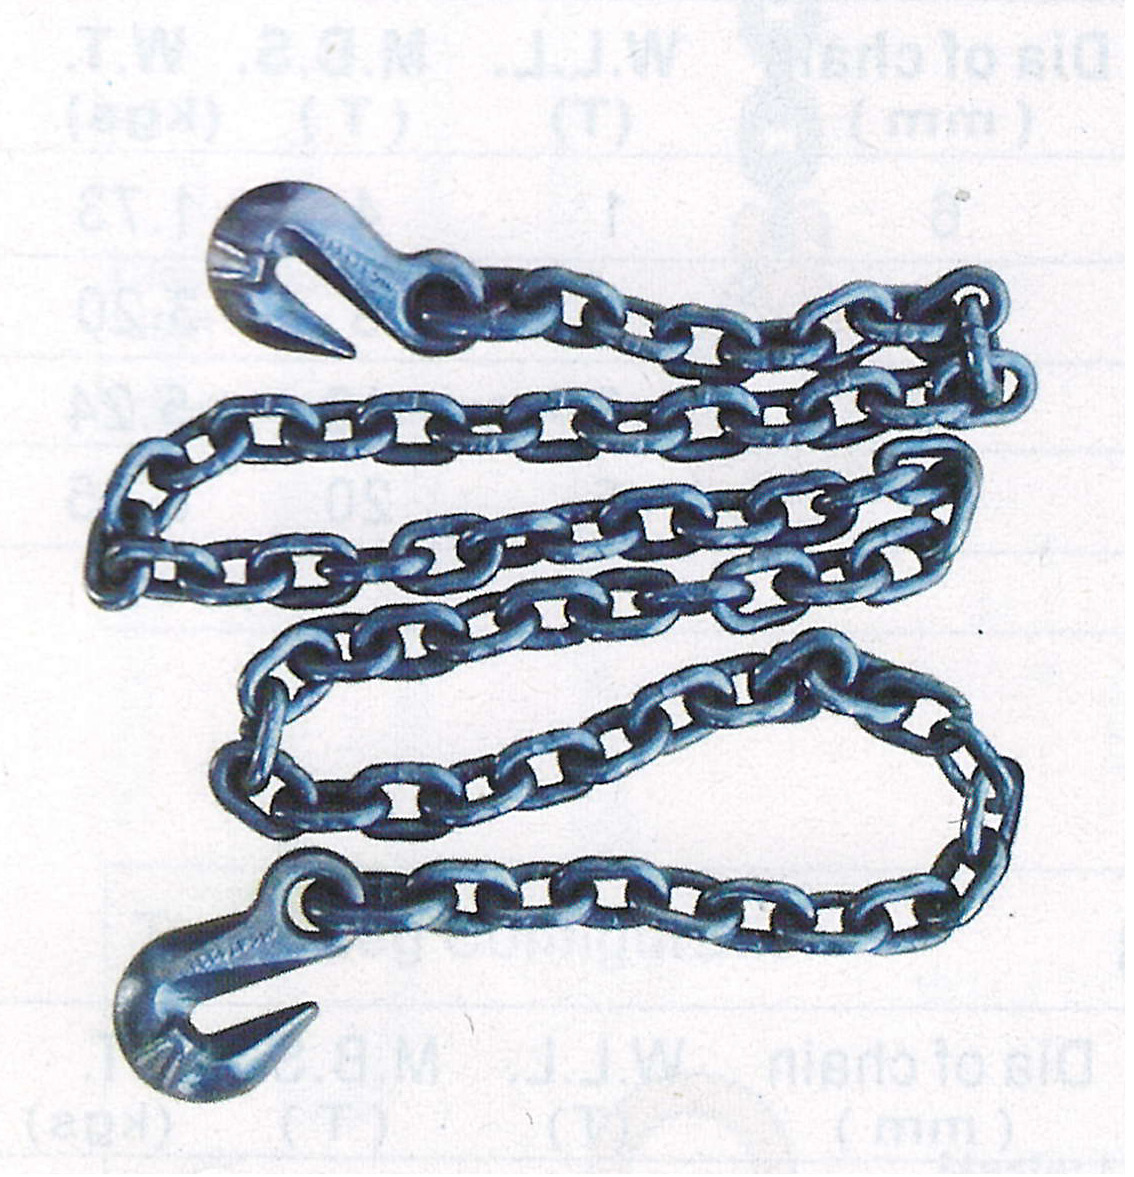 Binder Chain Two Hooks at Both Ends Grade 80